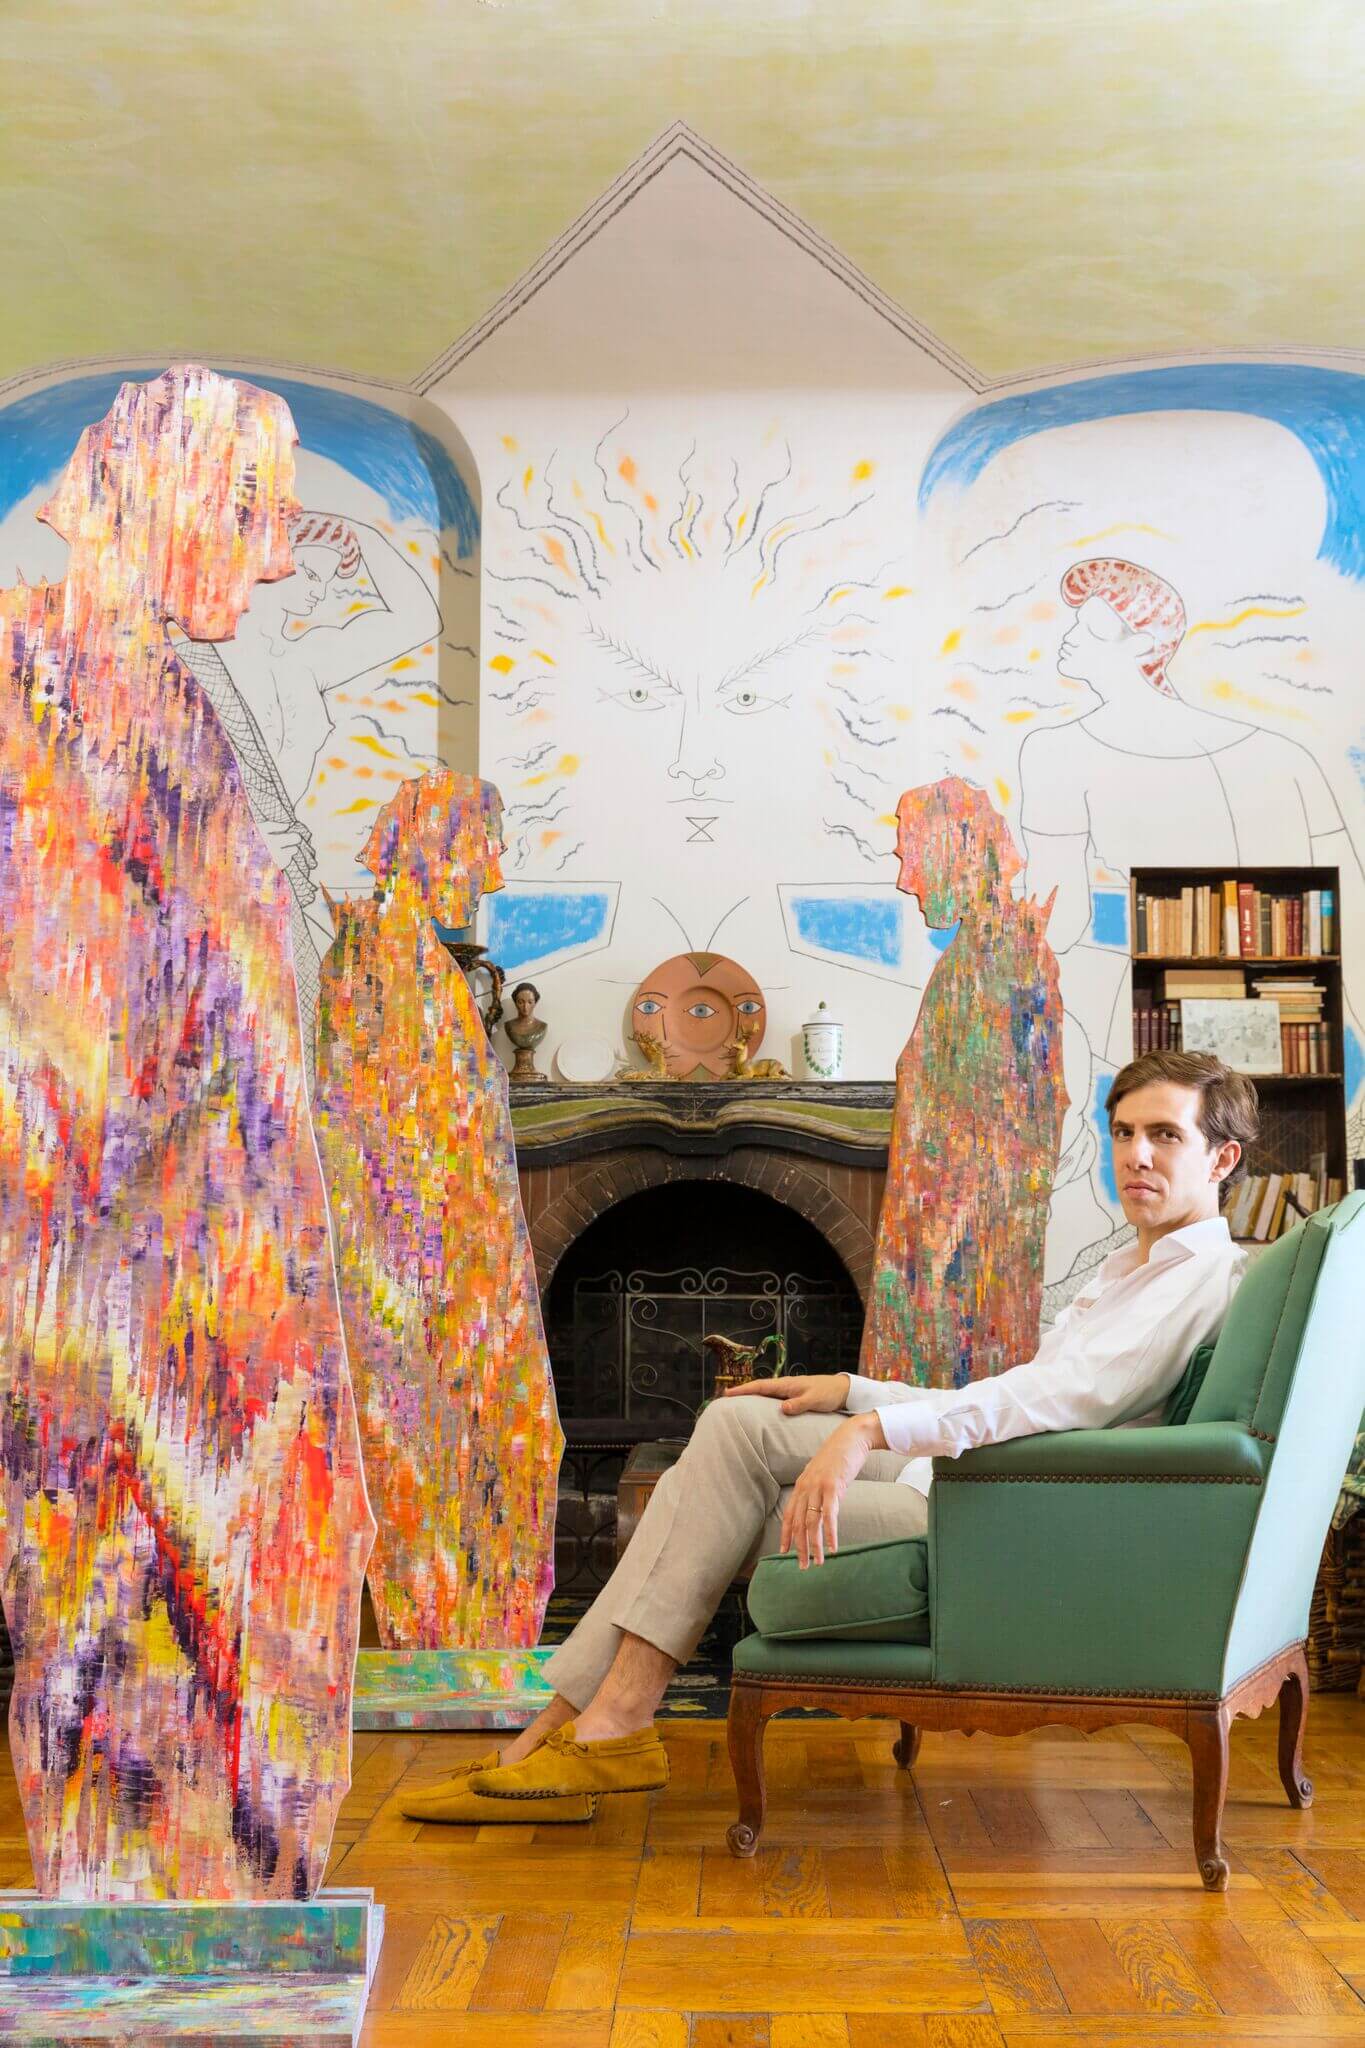 Man sits on arm chair surrounded by colourfully painted sculptures of male figures